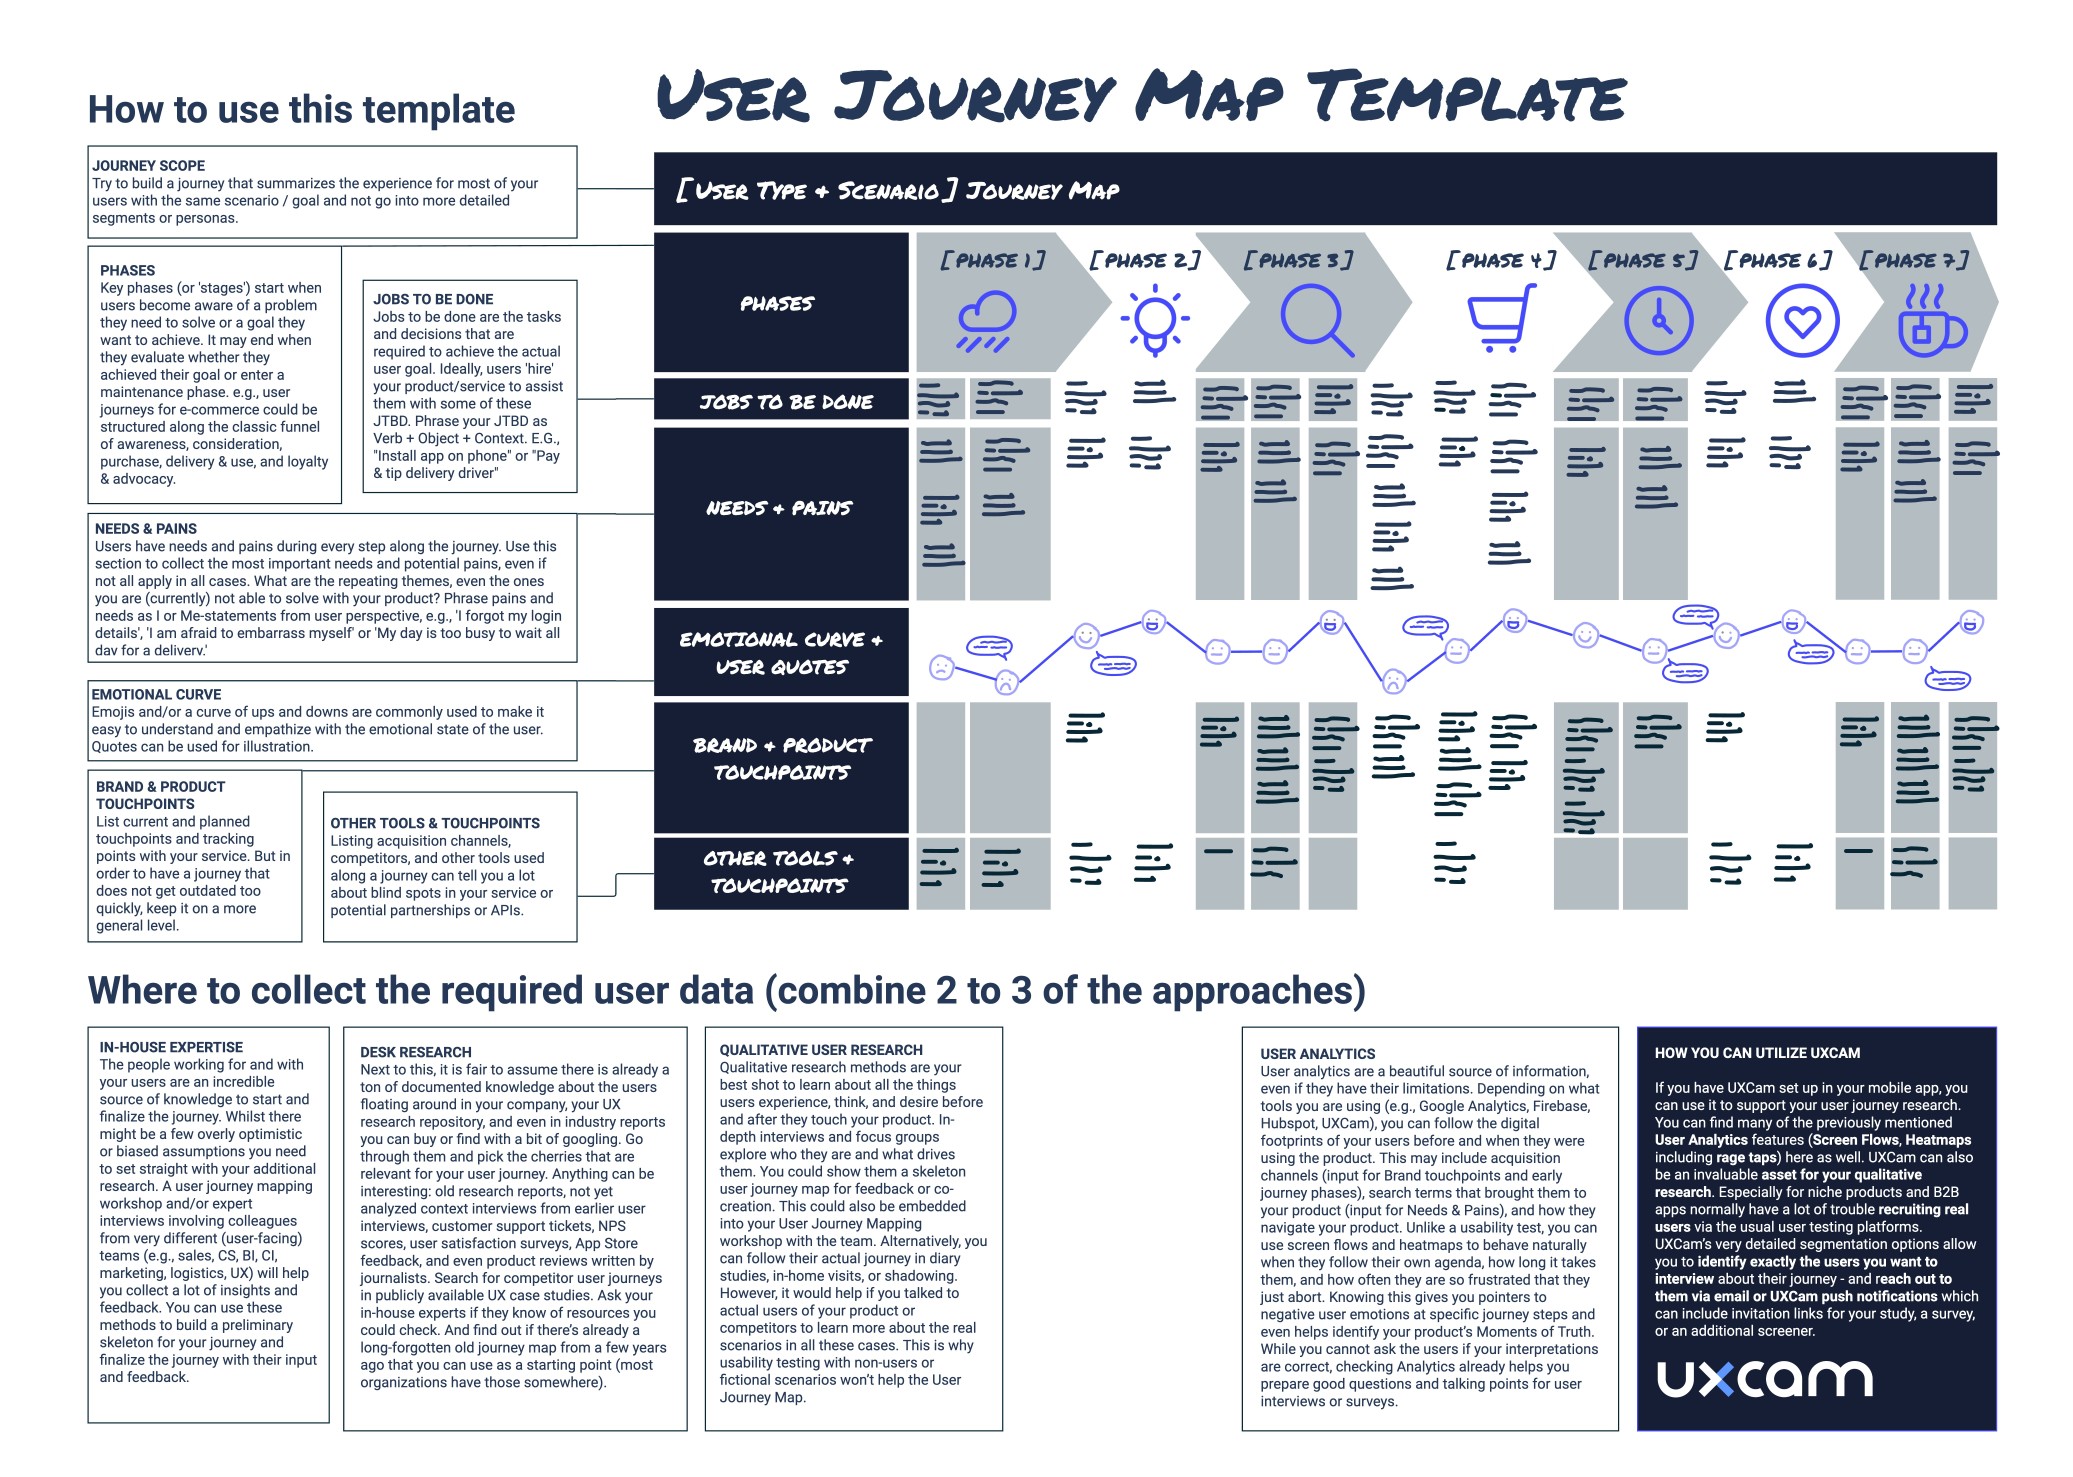 user journey map UX template